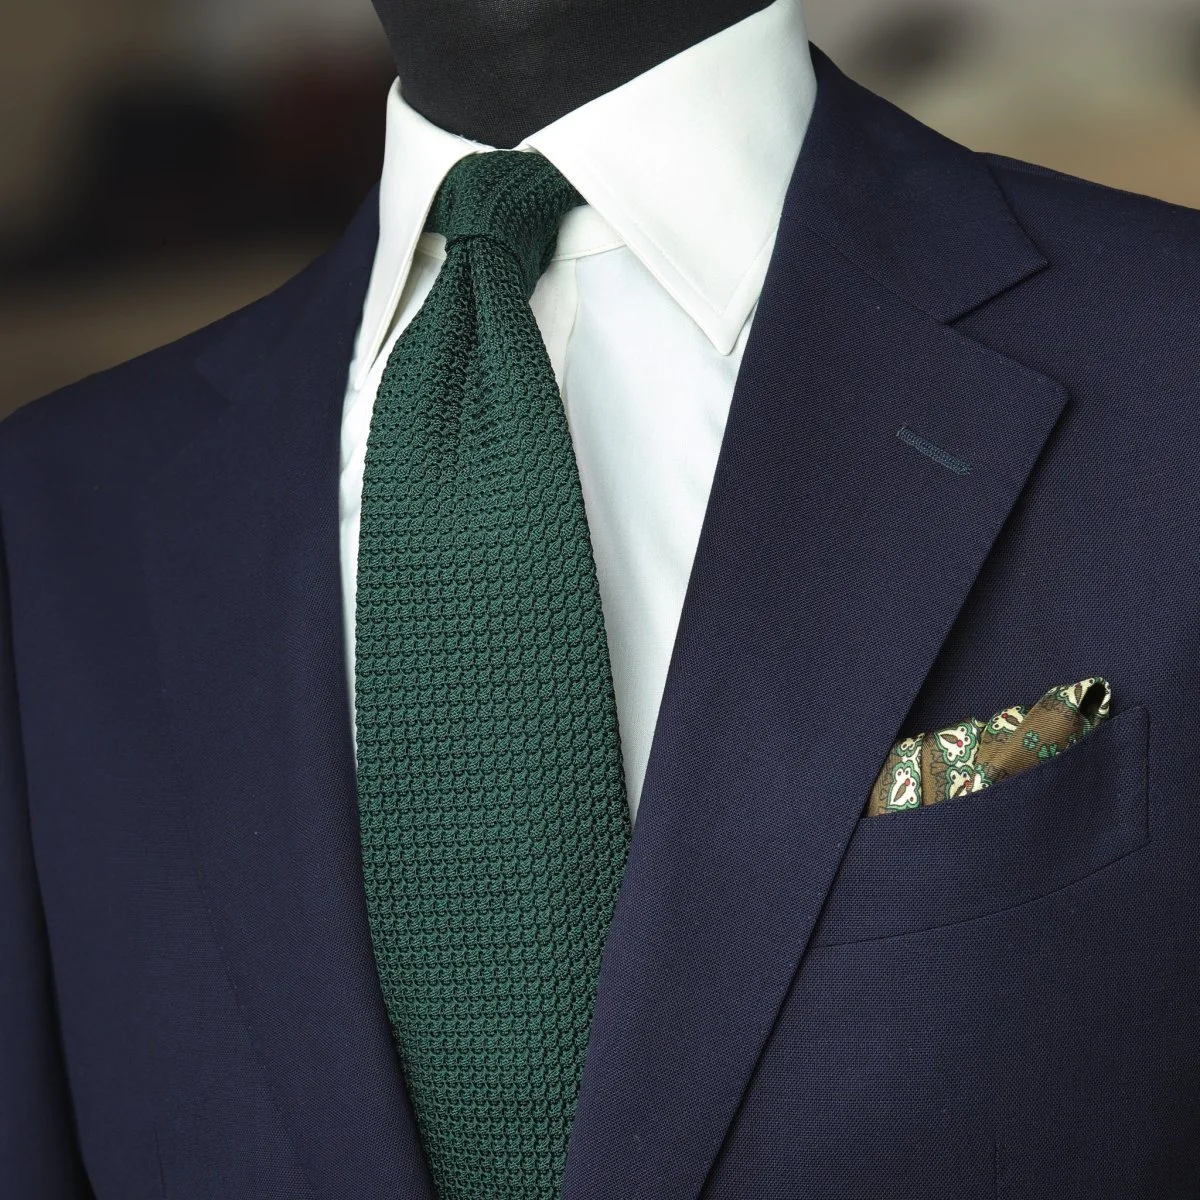 Blue suit, white shirt and green grenadine tie combination